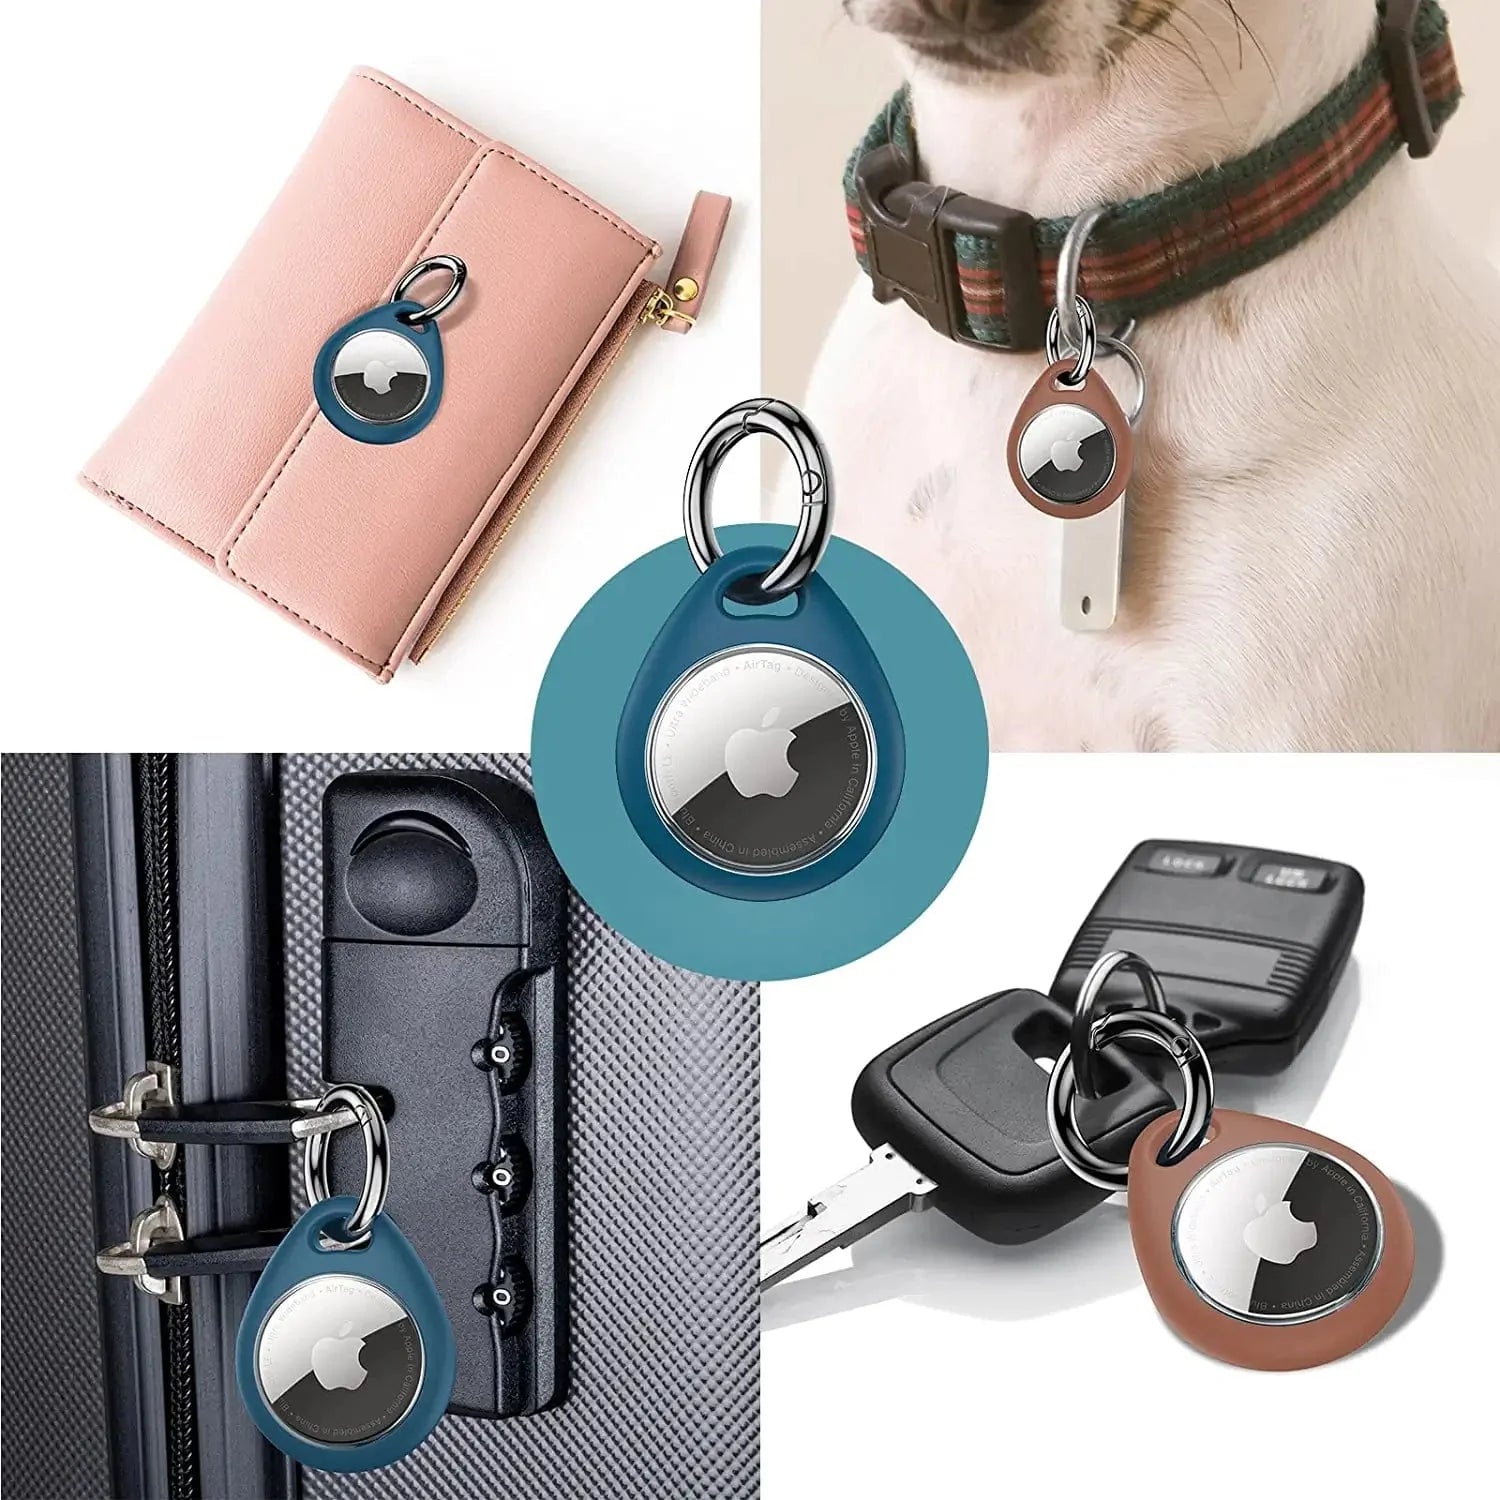 Airtag Keychain For Apple Airtag Holder,secure Air Tag Lock Holder For Dog  Collar,airtag Case With Key Ring 2 Pack Black/blue 